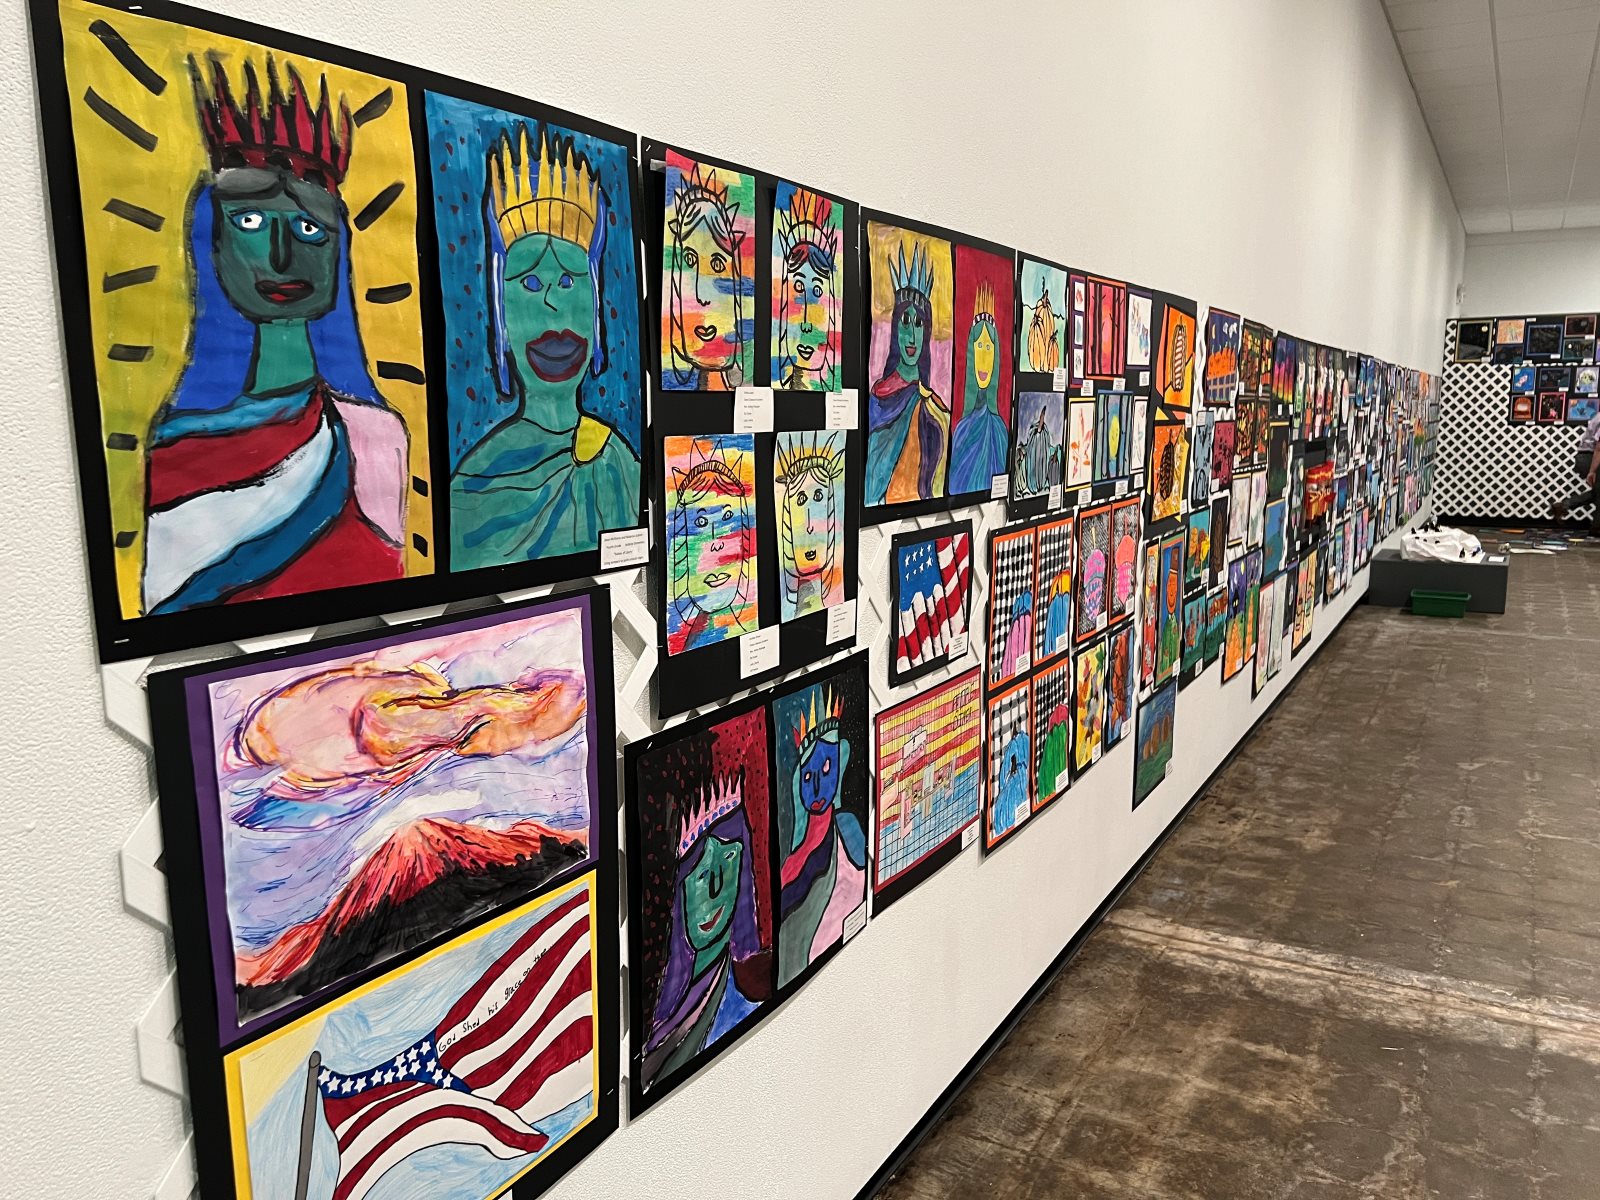 Artwork by children hangs on the walls of the Springfield Art Museum